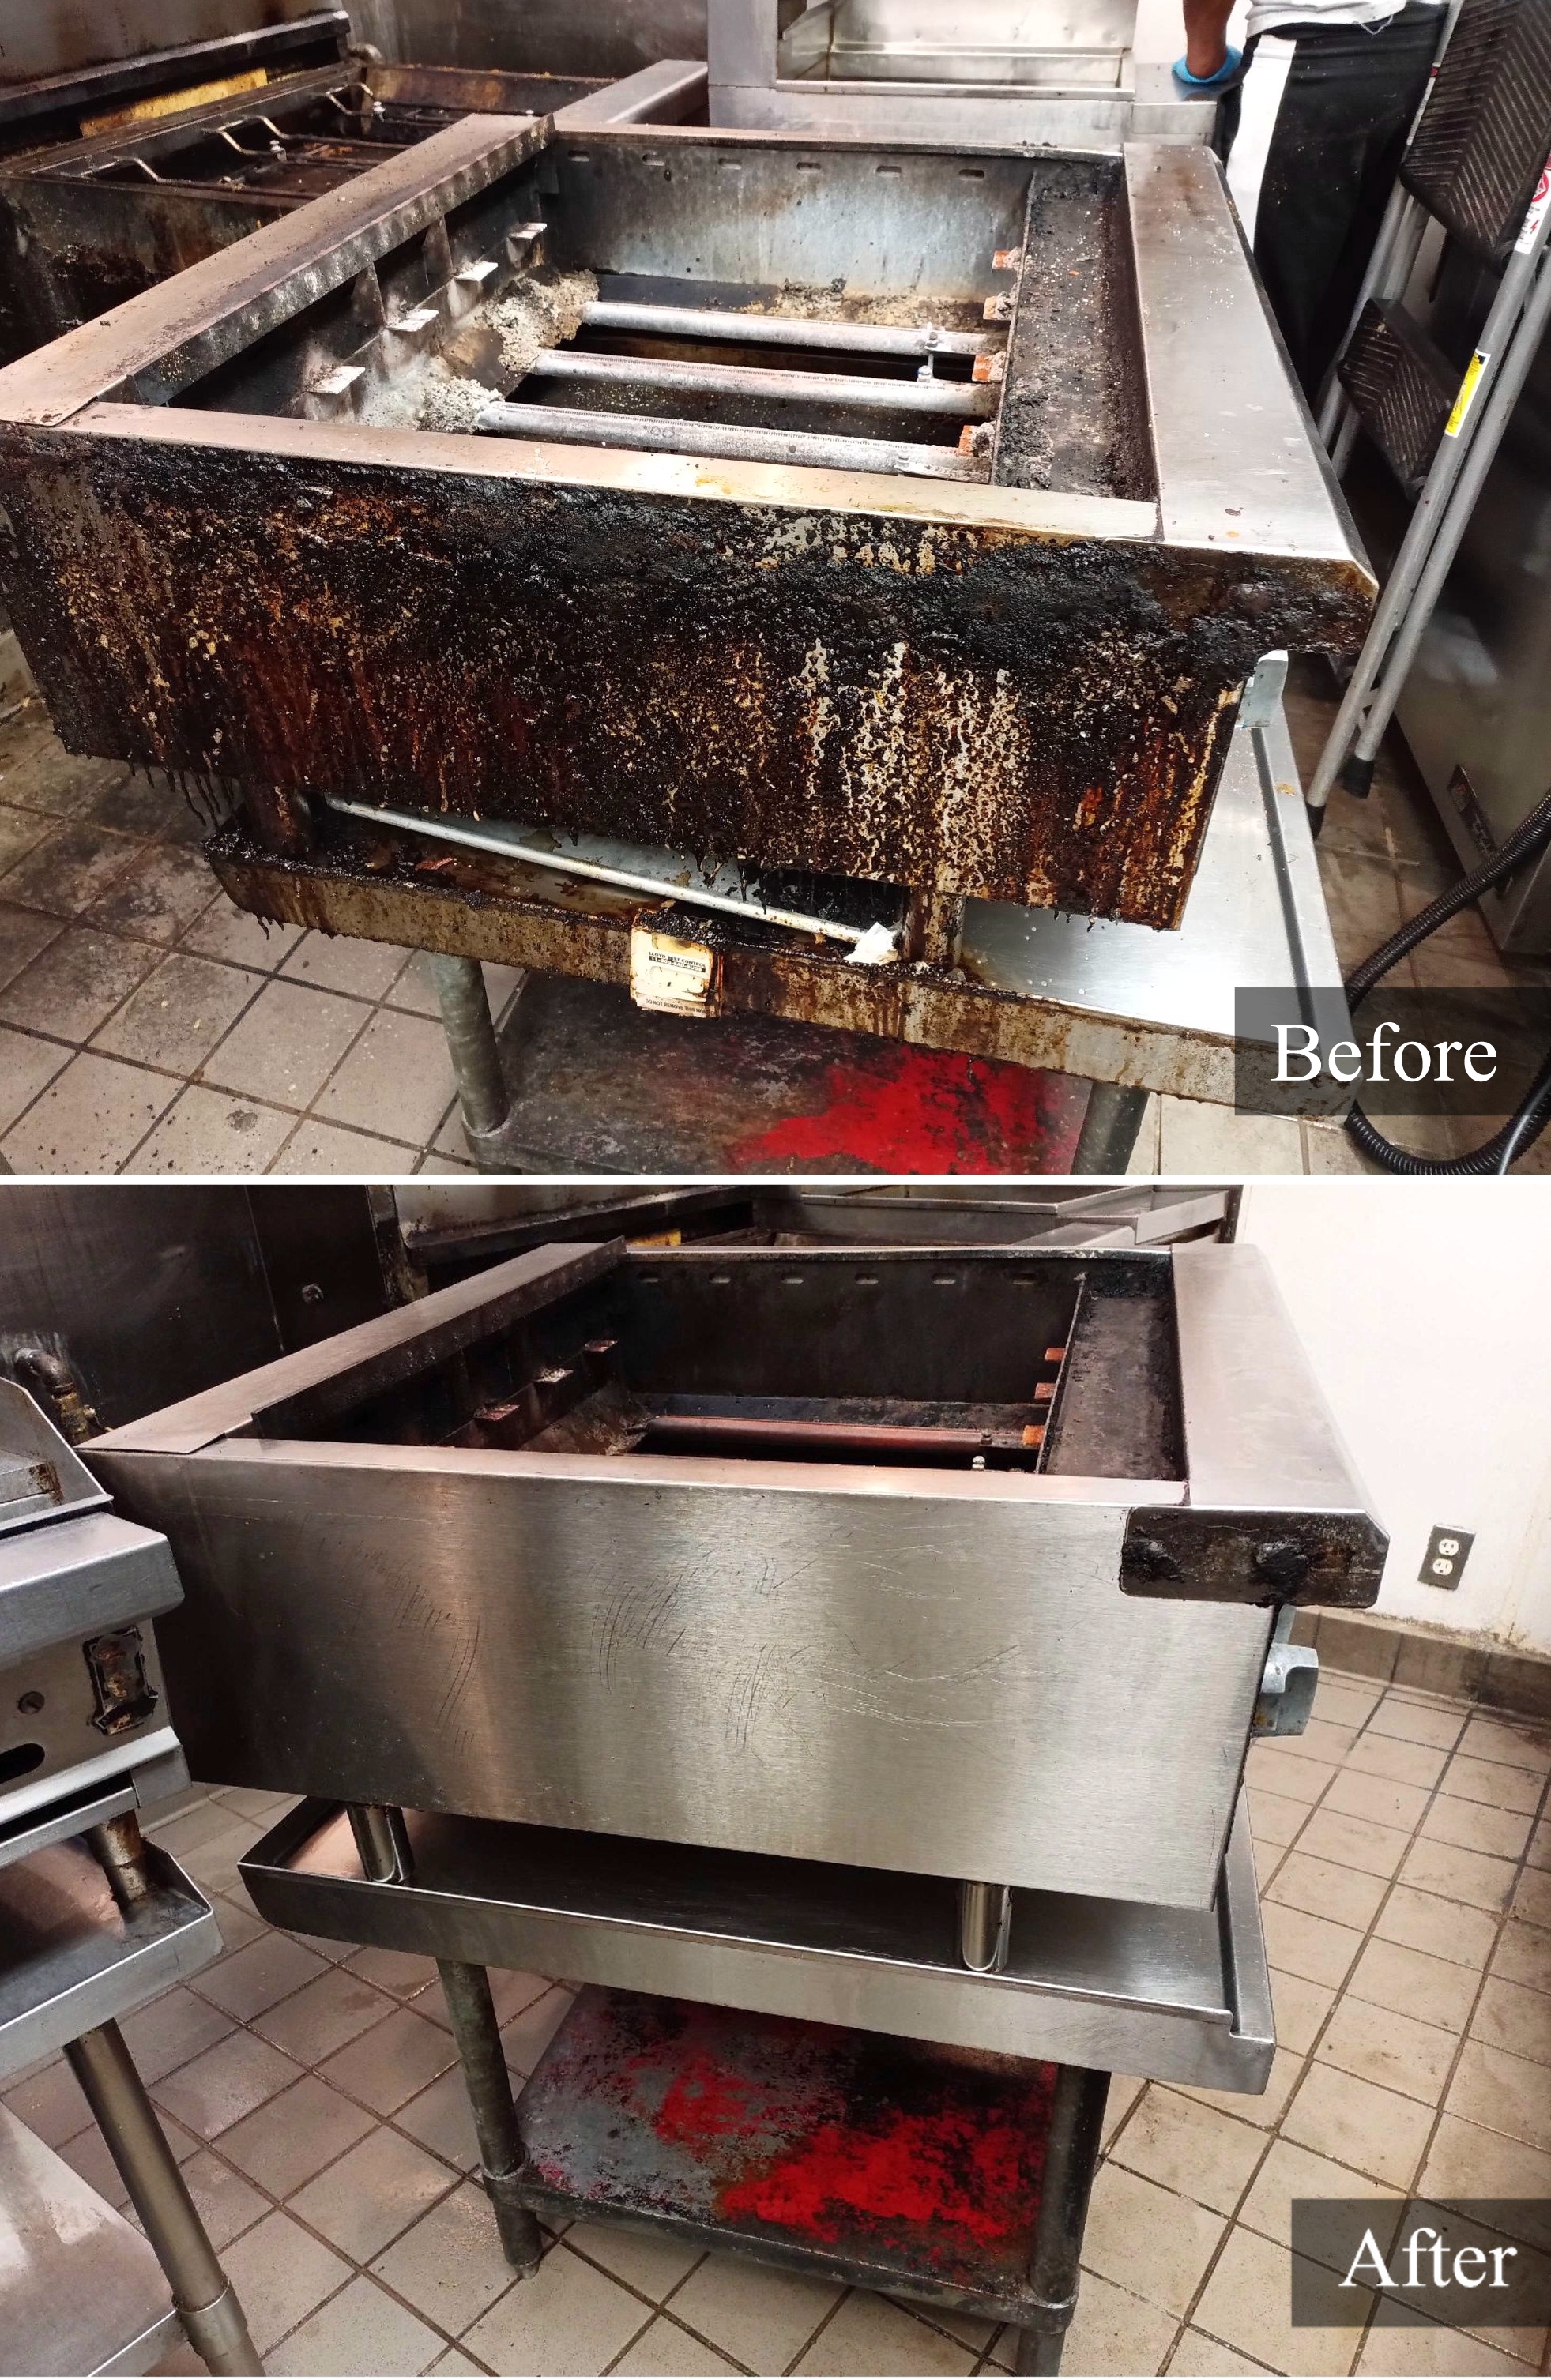 Allstar Commercial Cleaning offers deep fryer cleaning services in La Jolla, CA and surrounding areas throughout San Diego County. Deep fryer cleaning is an essential practice that will increase the life-span of your equipment, as well as the quality of frying oil. When grime and grease begin to accumulate within your deep fryer, it will effect the efficiency in which your fryer operates and can lead to costly repairs. Allstar Commercial Cleaning possess the right cleaning tools and products that will ensure that your deep fryer is sufficiently cleaned for peak operation efficiency. Grease Trap Cleaning and Commercial Deep Fryer Cleaning in La Jolla, CA When you need Commercial Deep fryer Cleaning in La Jolla, you can depend on our expert technicians to respond quickly. Allstar Commercial Cleaning of San Diego provides deep cleaning services for San Diego area restaurants. We specialize in various deep cleaning procedures of ranges, ovens, deep-fryers, hood vents, etc to ensure passing all Fire and Health & Food inspections. We can detail clean your ovens, grills, fryers, stainless steel equipment, walls and ceilings, and machine scrub your floors.